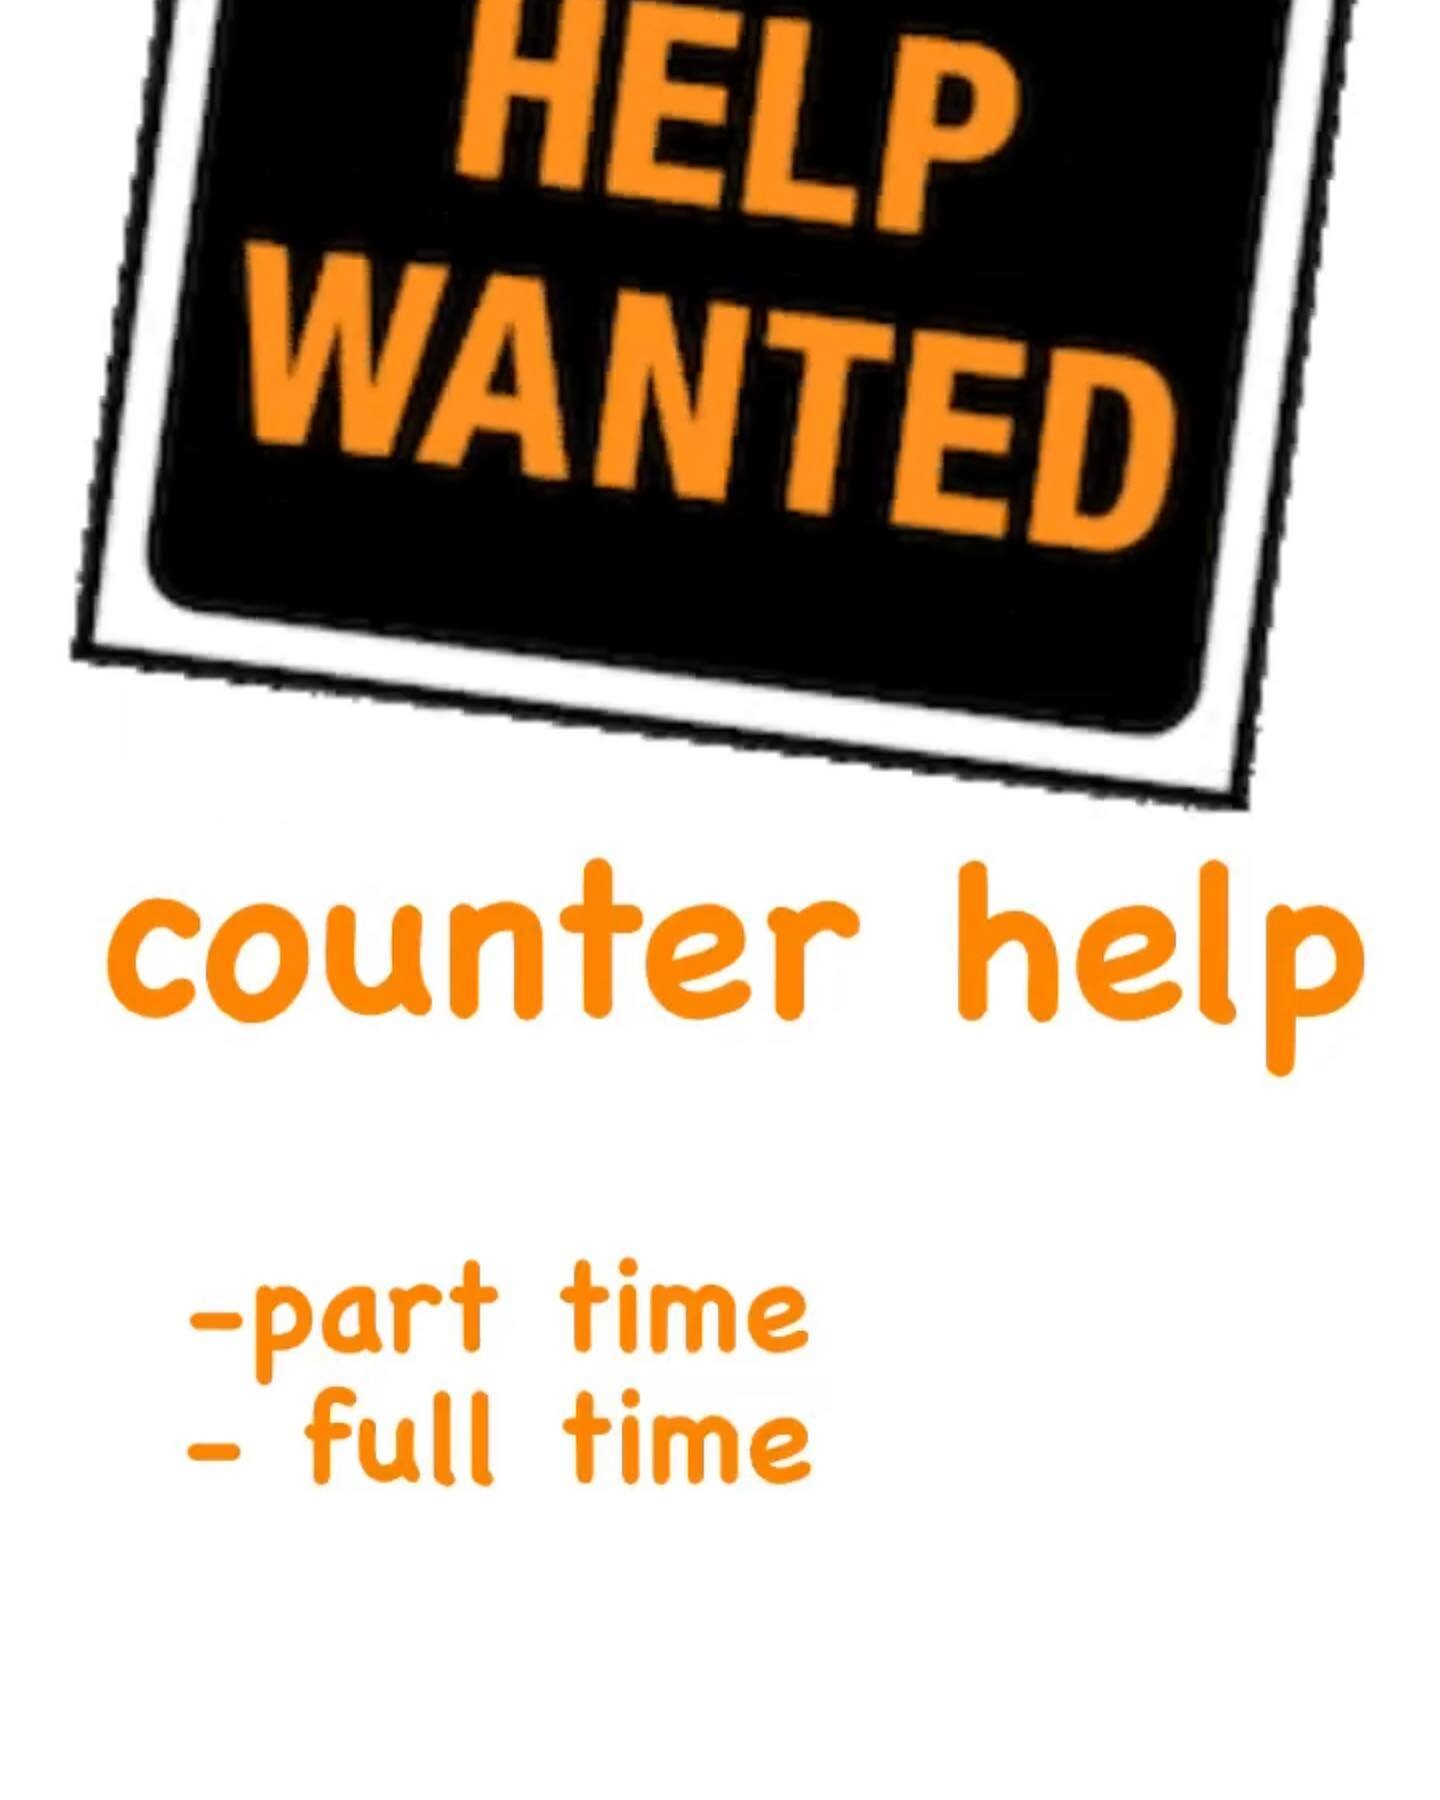 We are hiring , counter help full time &amp; part time please call or stop by for interview